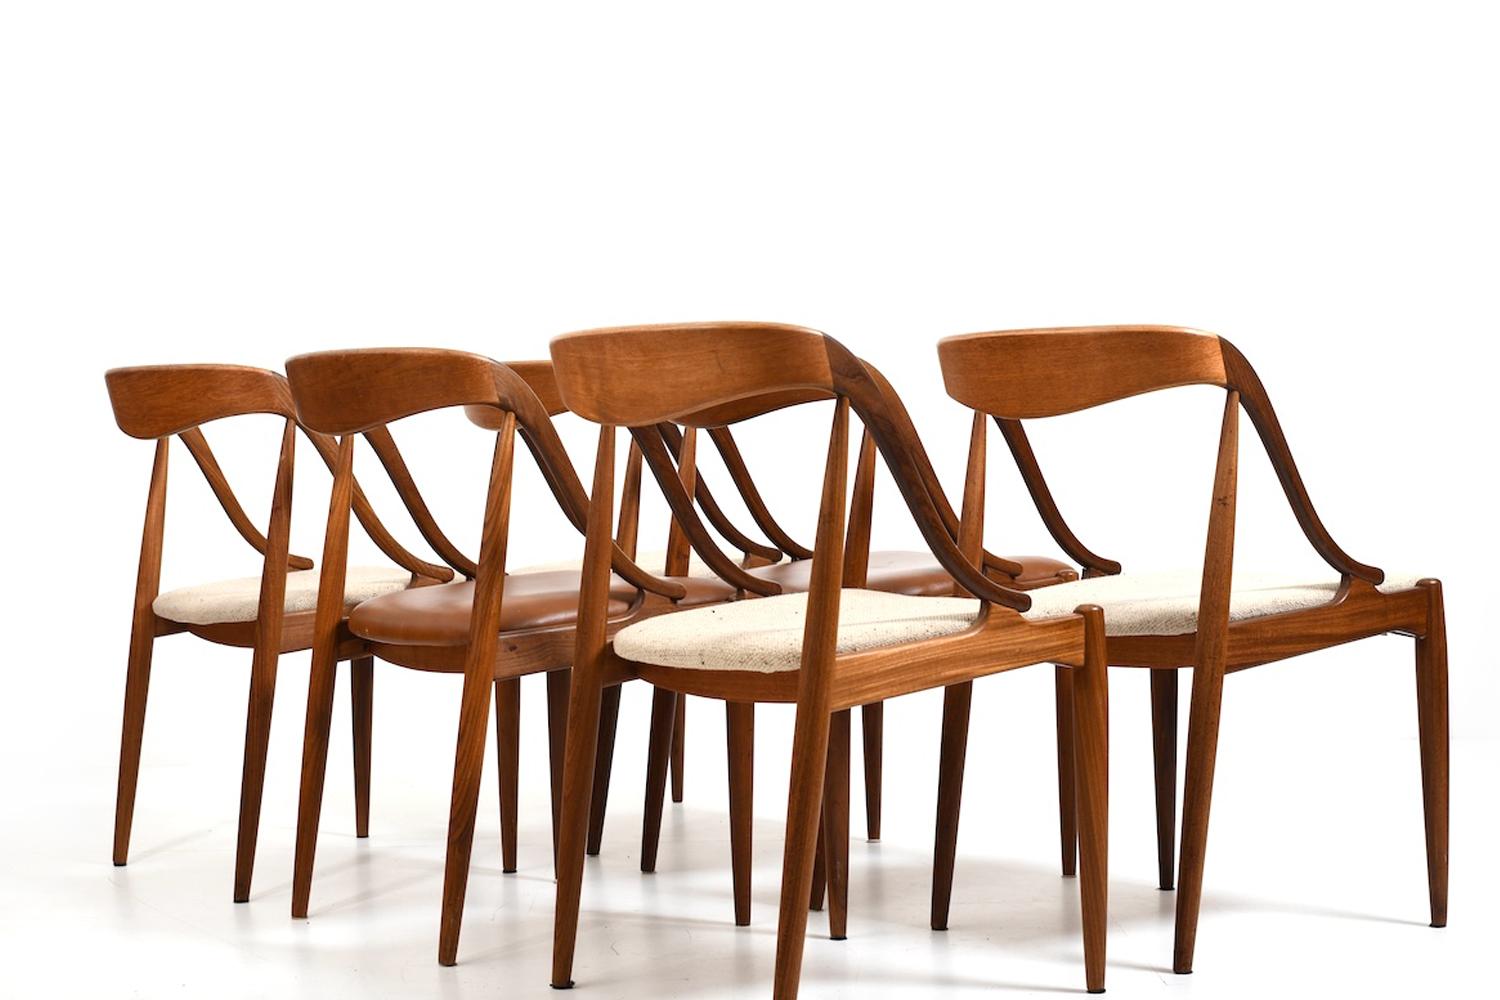 20th Century Teak Dining Chairs by Johannes Andersen 1960s For Sale